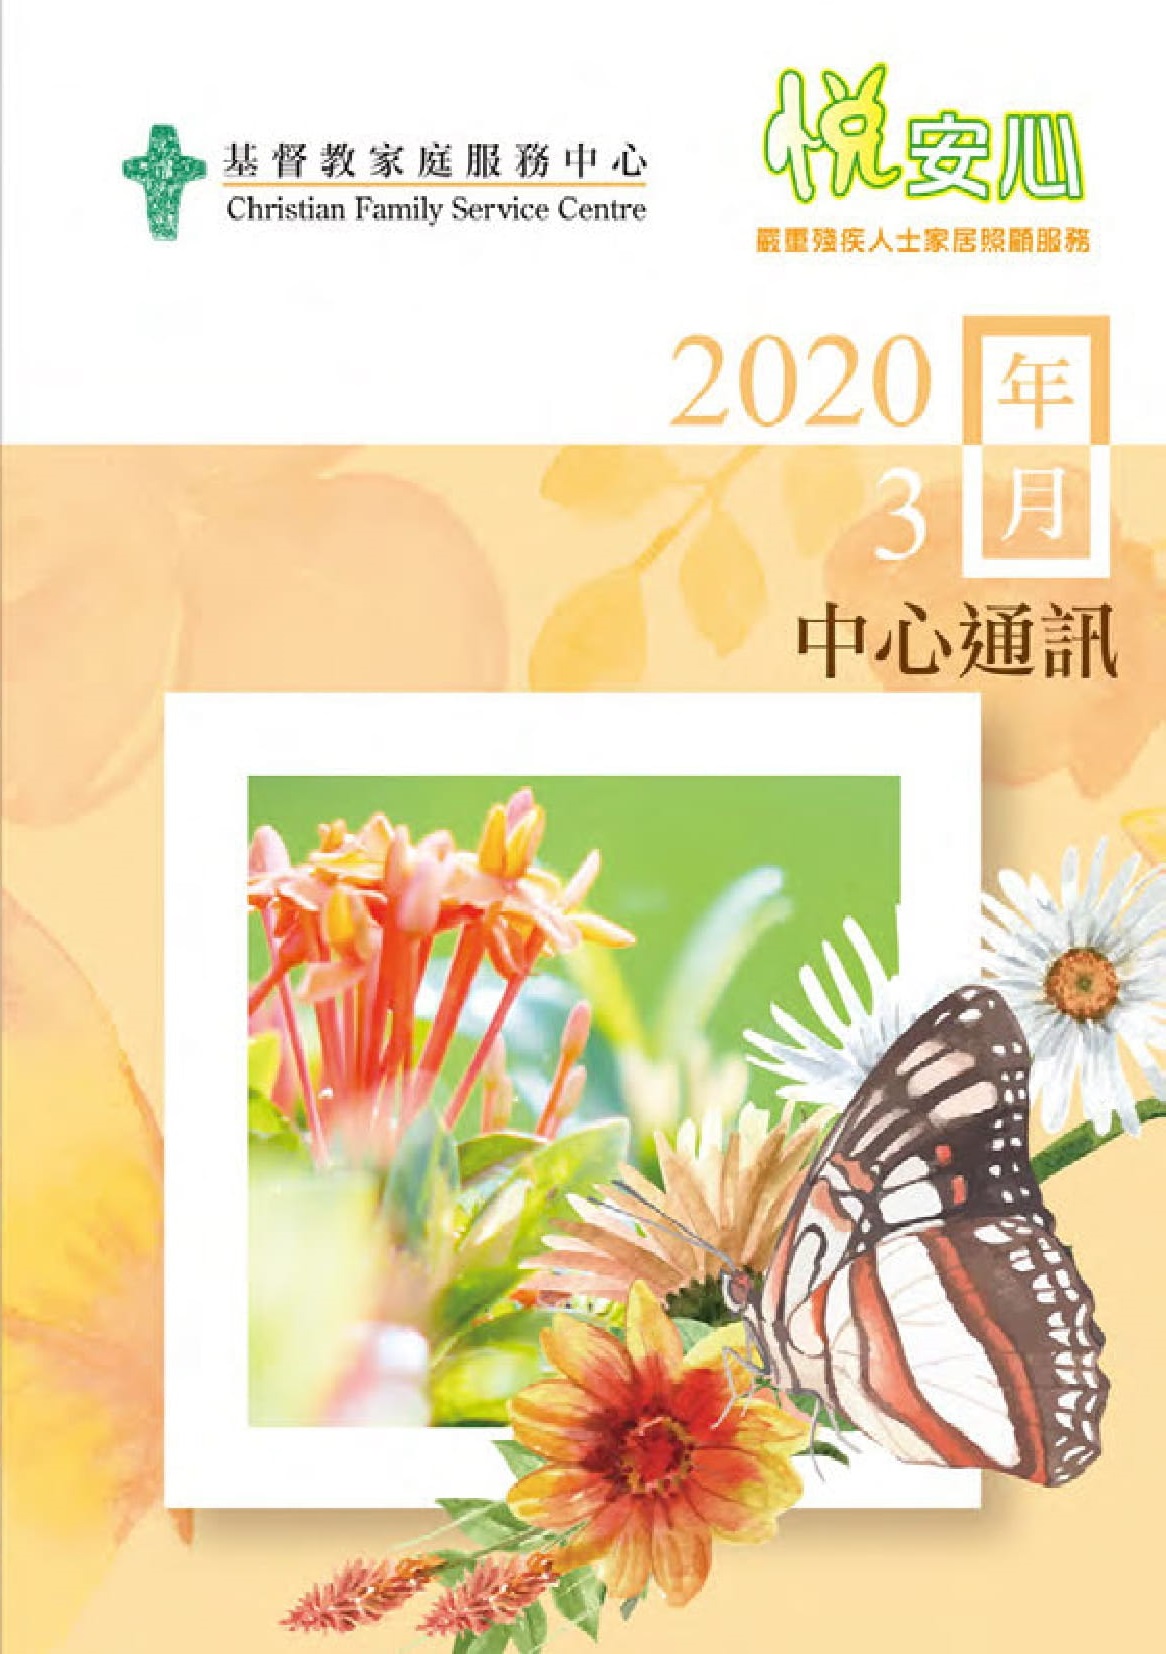 2020 New Letter (Spring to Summer)